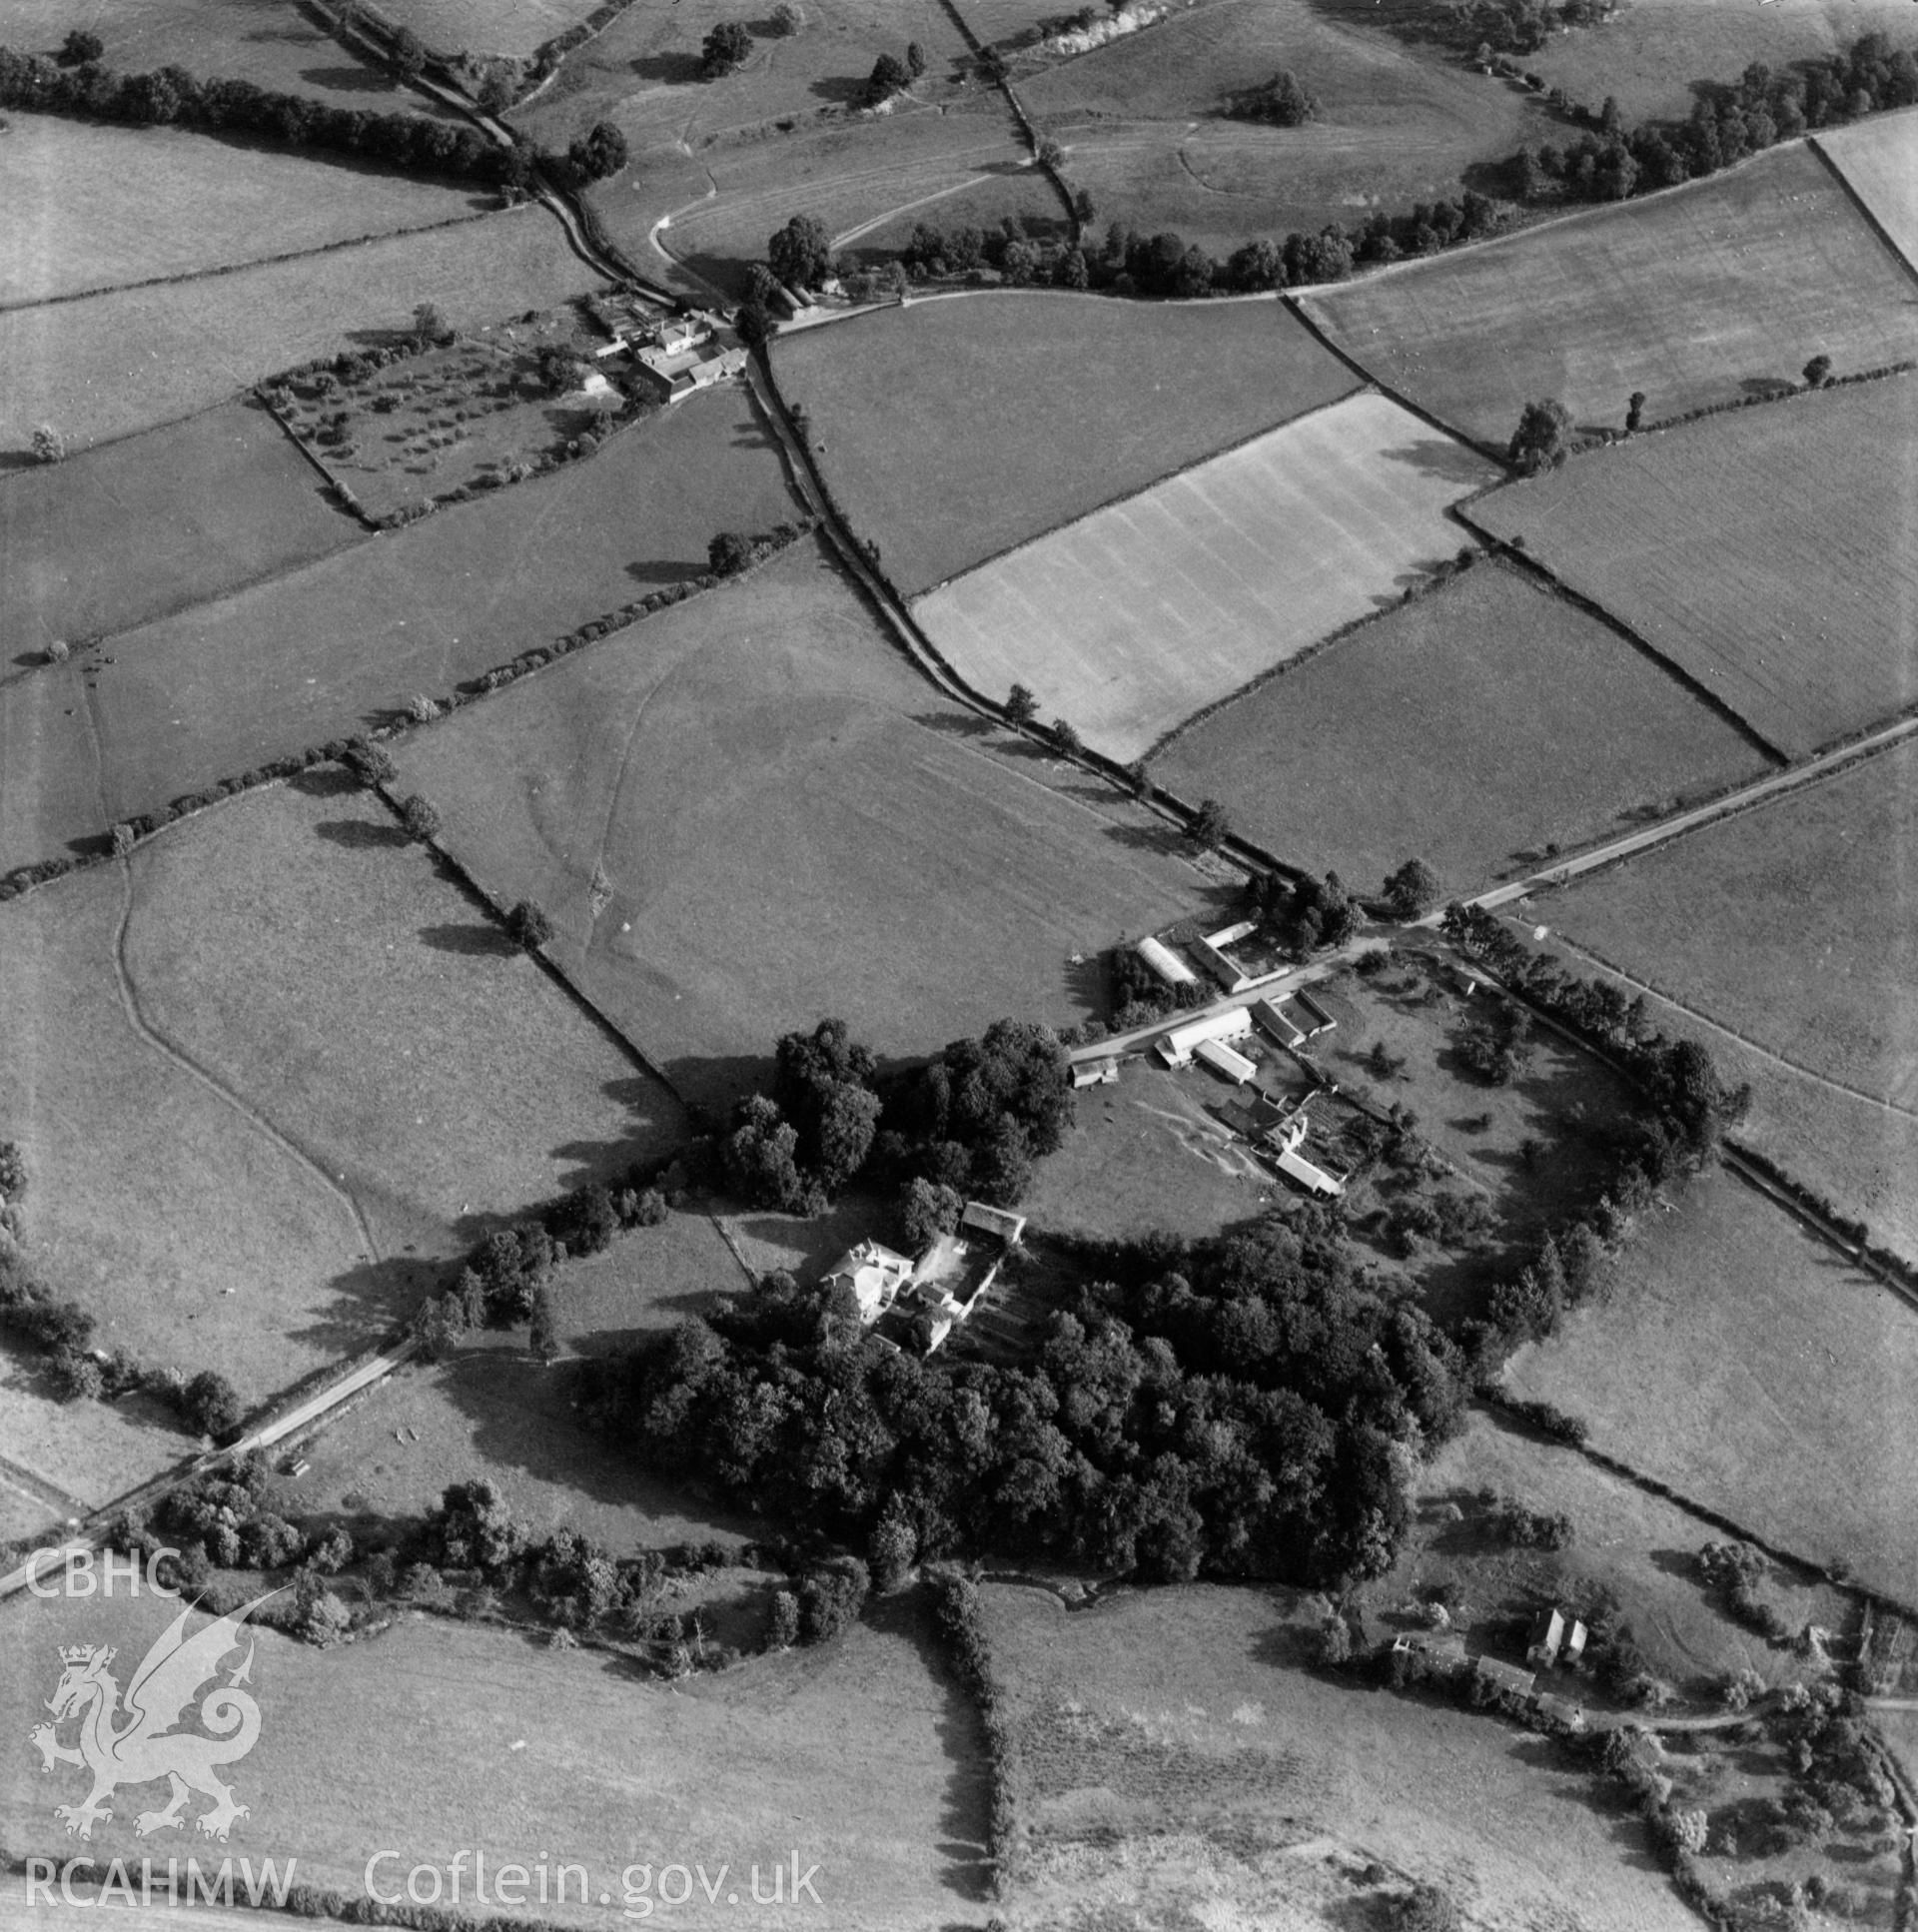 View of Lugg valley showing The Grove, Maes Treylow, and Yew Tree farm in the distance. Oblique aerial photograph, 5?" cut roll film.